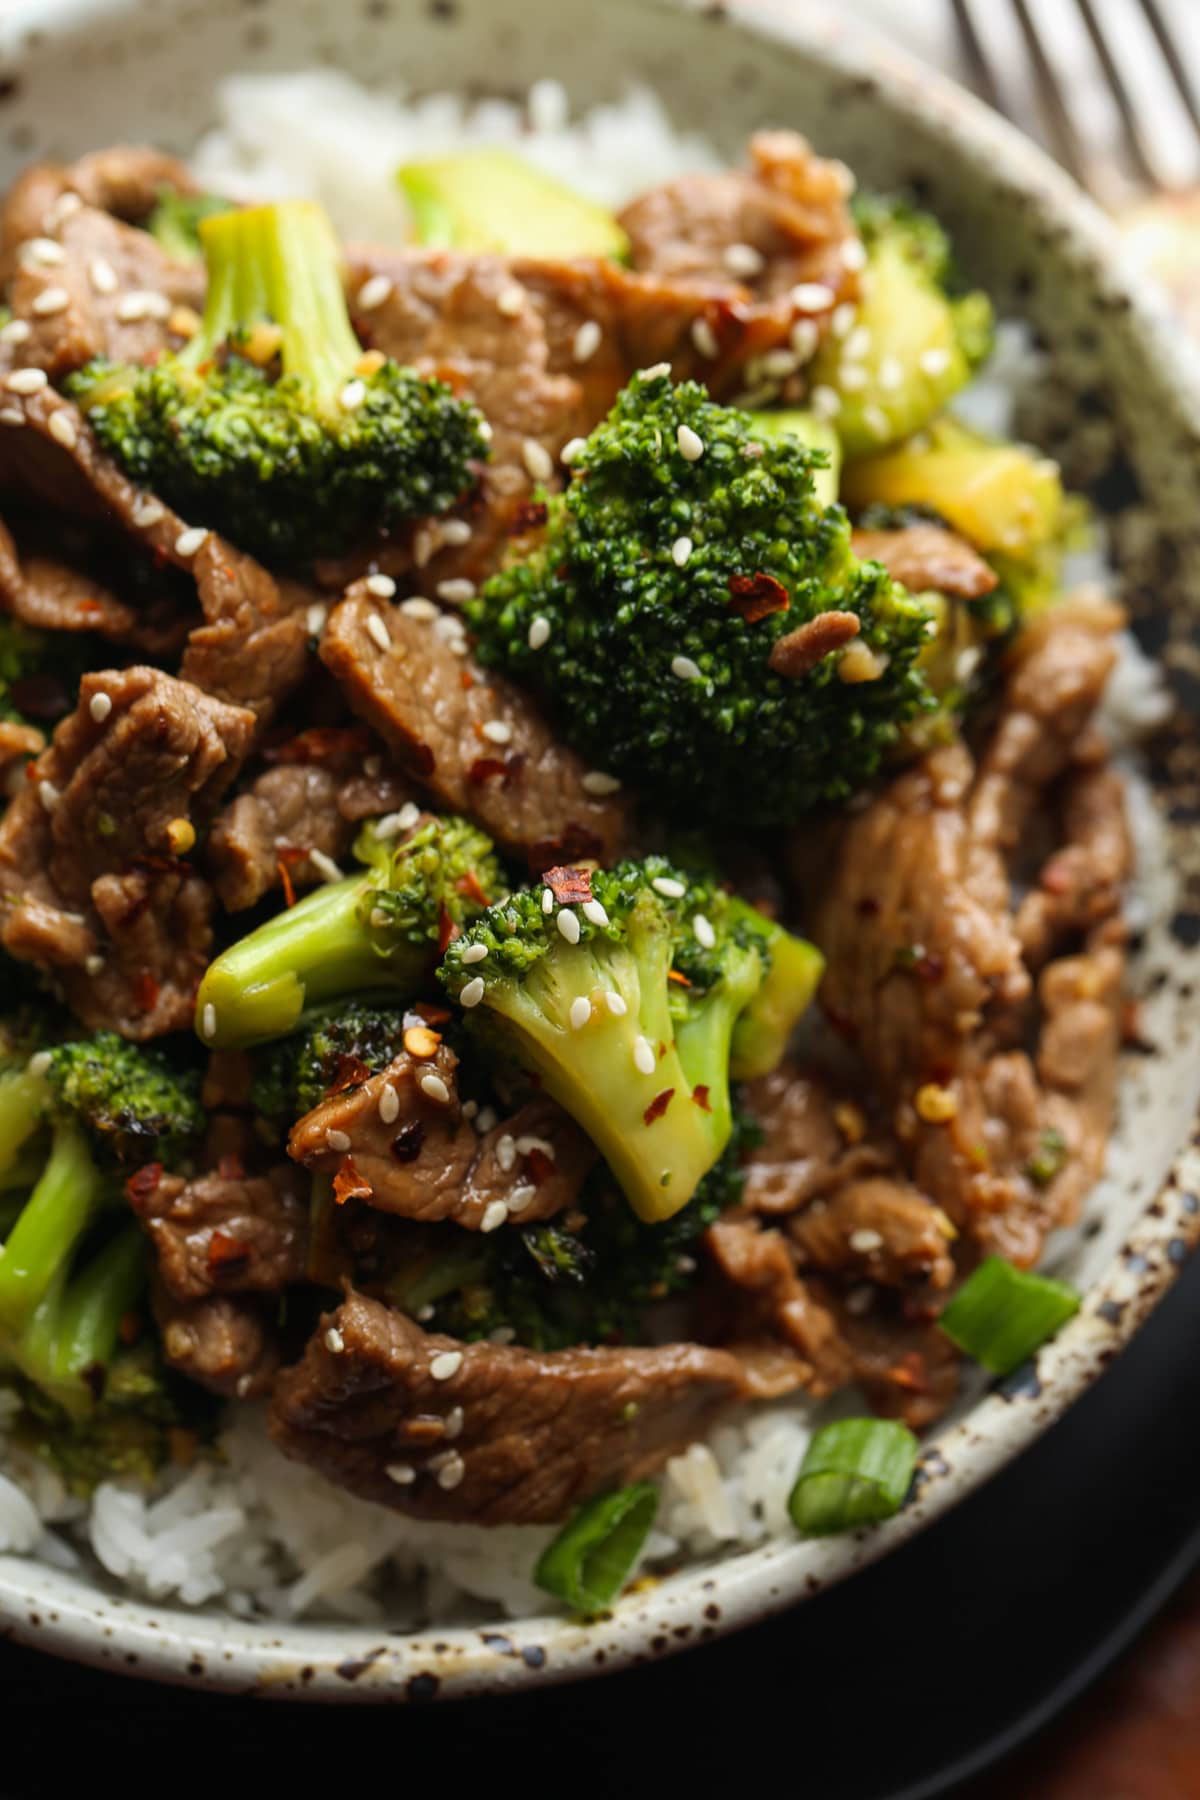 Plate of beef and broccoli over rice.